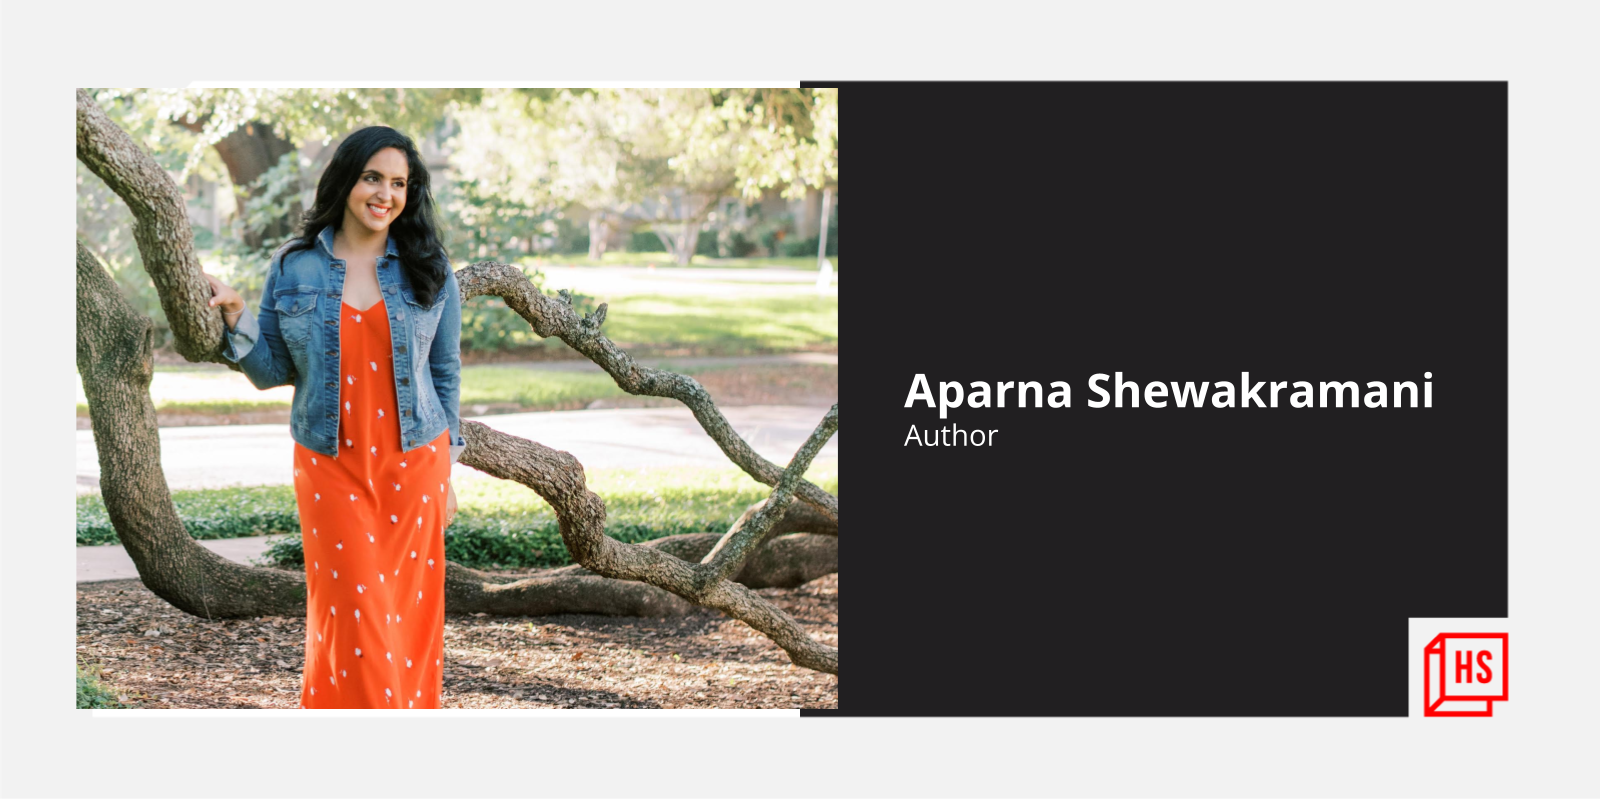 Indian Matchmaking star Aparna Shewakramani on her new book, a part-memoir and part-manifesto

 